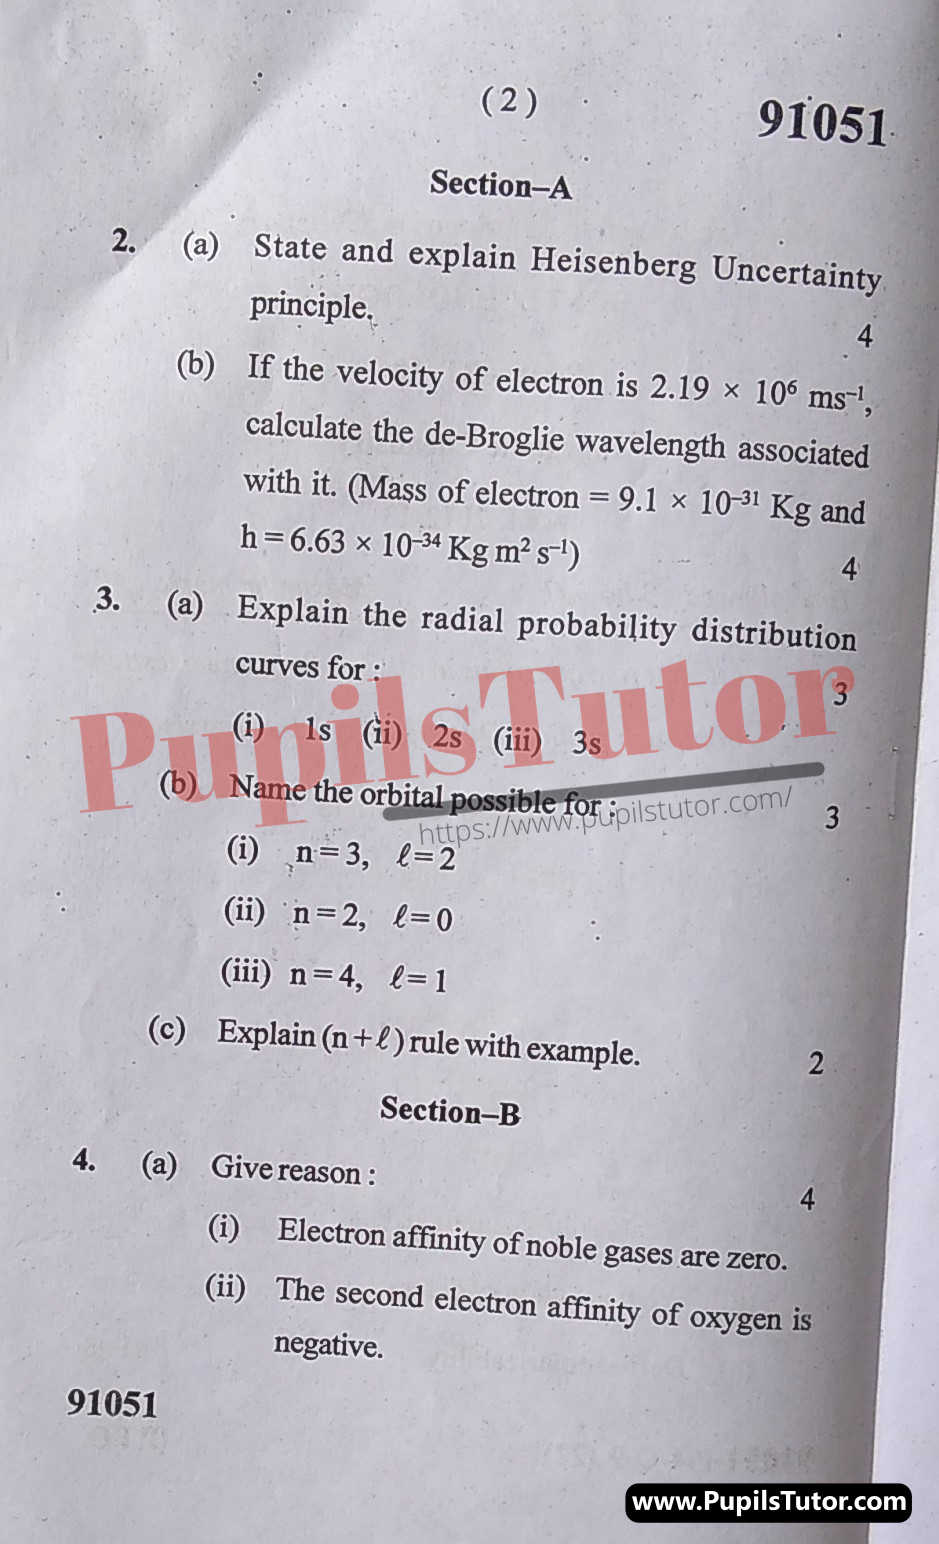 M.D. University B.Sc. [Bio-Technology] Inorganic Chemistry First Semester Important Question Answer And Solution - www.pupilstutor.com (Paper Page Number 2)